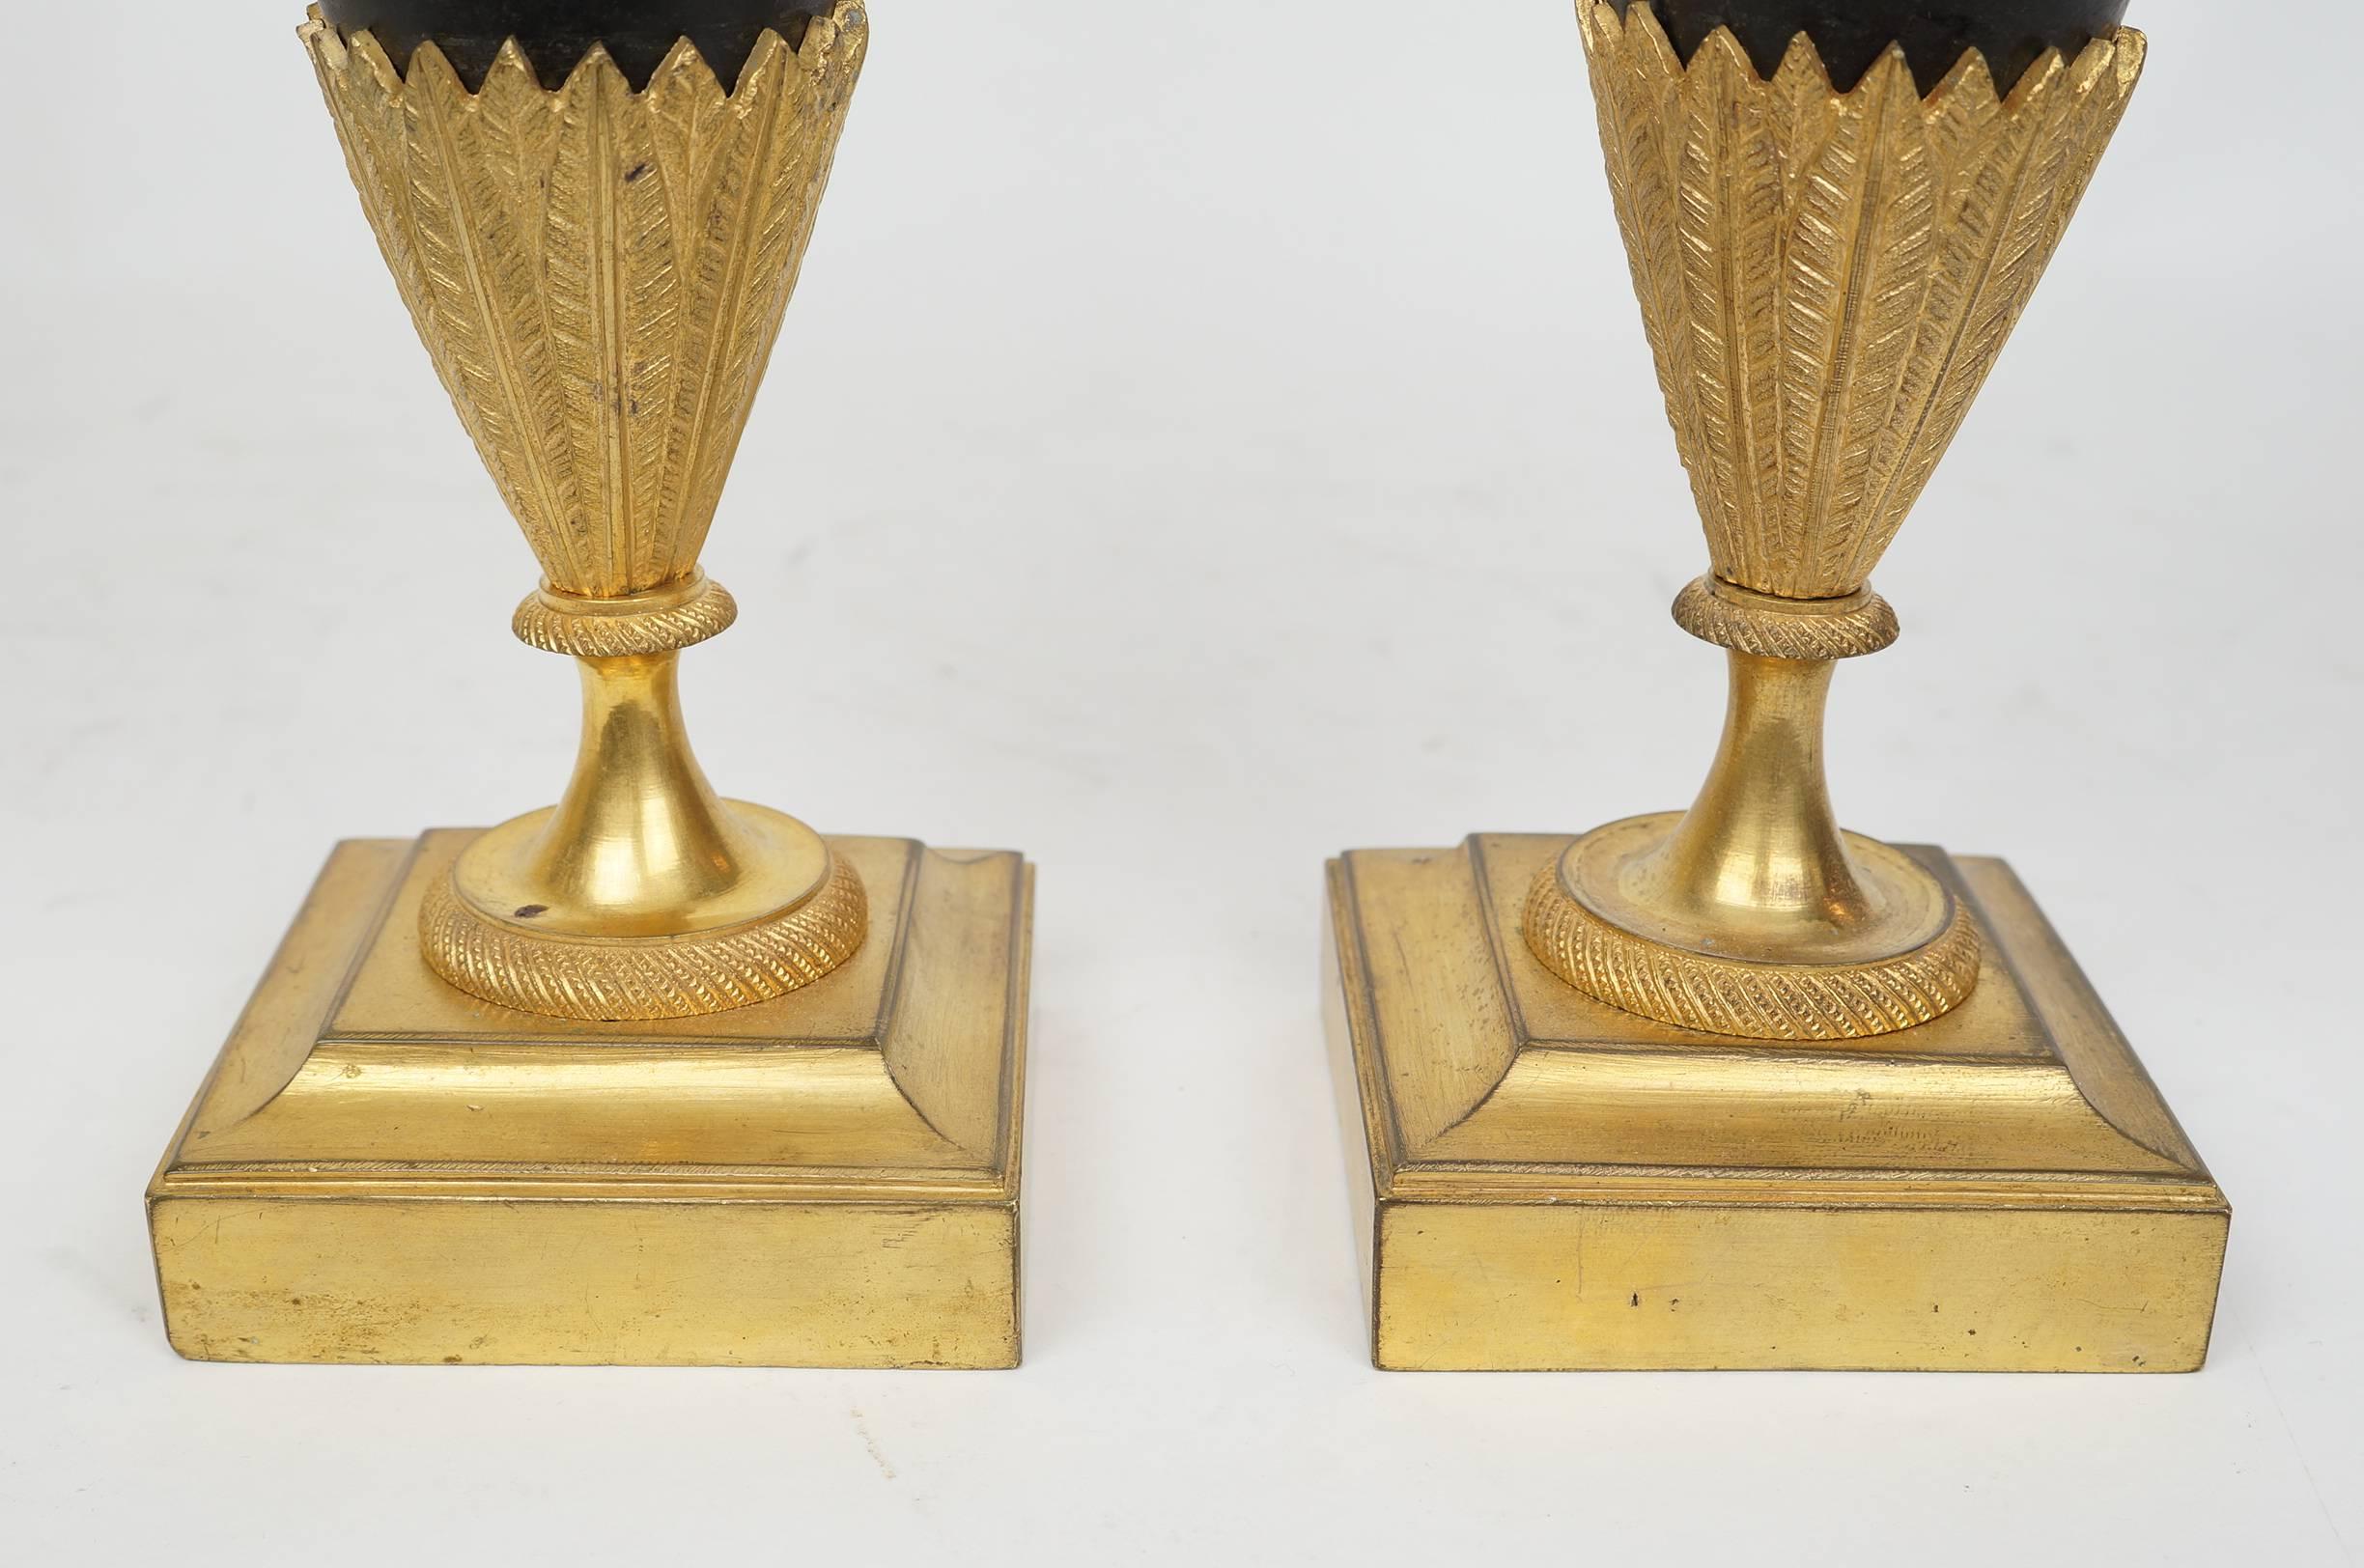 19th Century Pair of Russian Empire Style Patinated and Gilt Bronze Ewers with Rooster Head